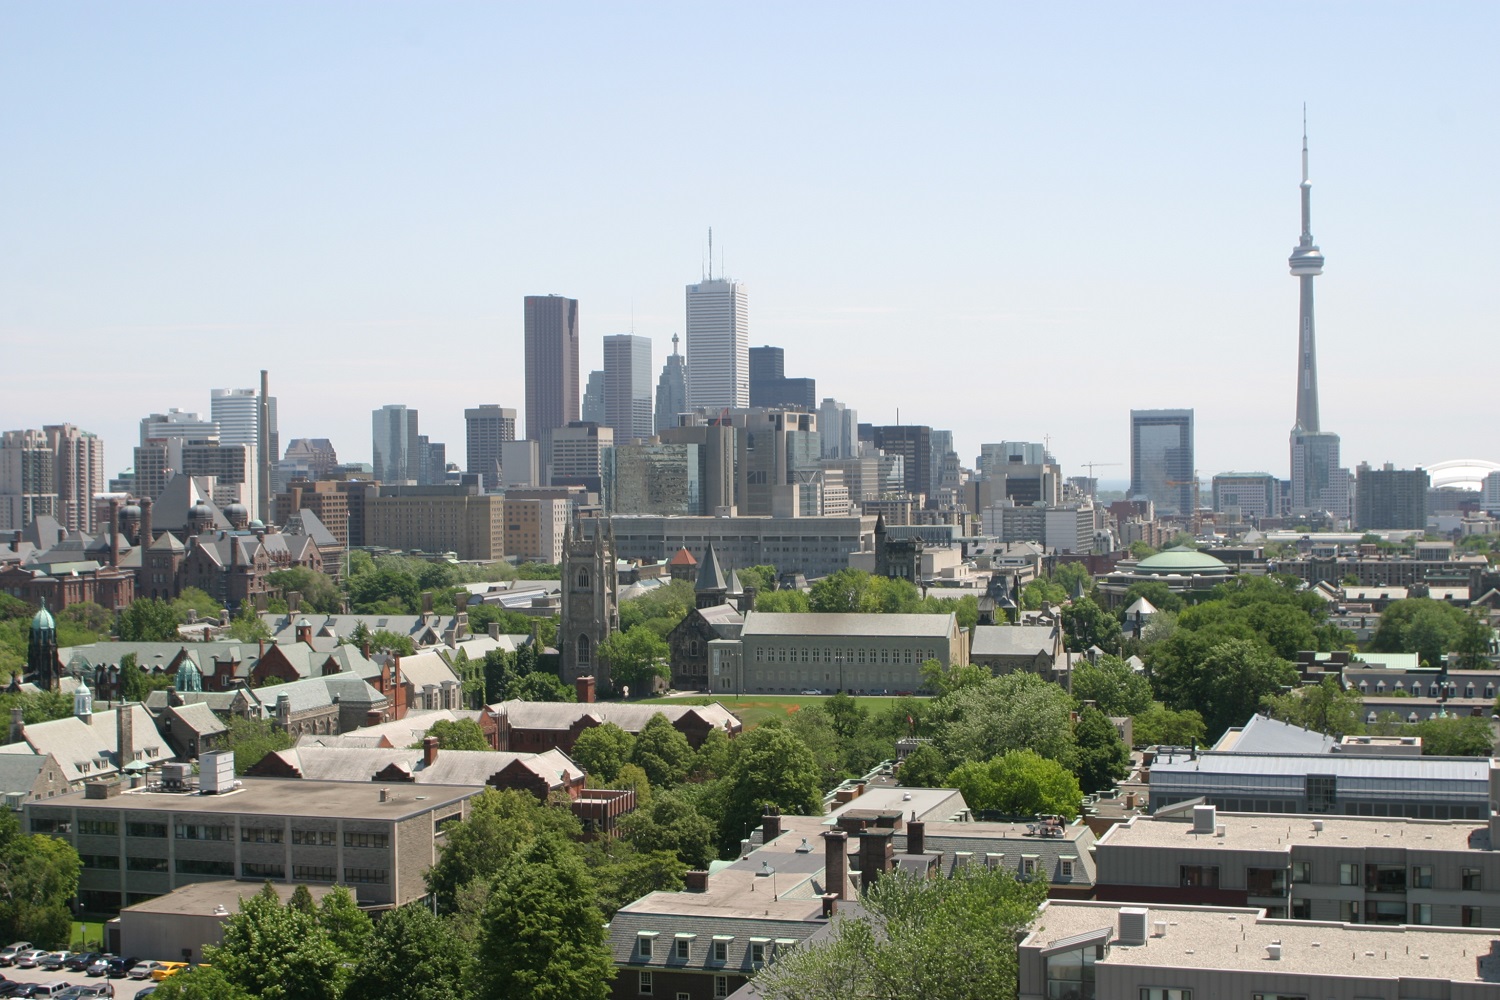 U of T’s new School of Cities unites experts to address urban challenges